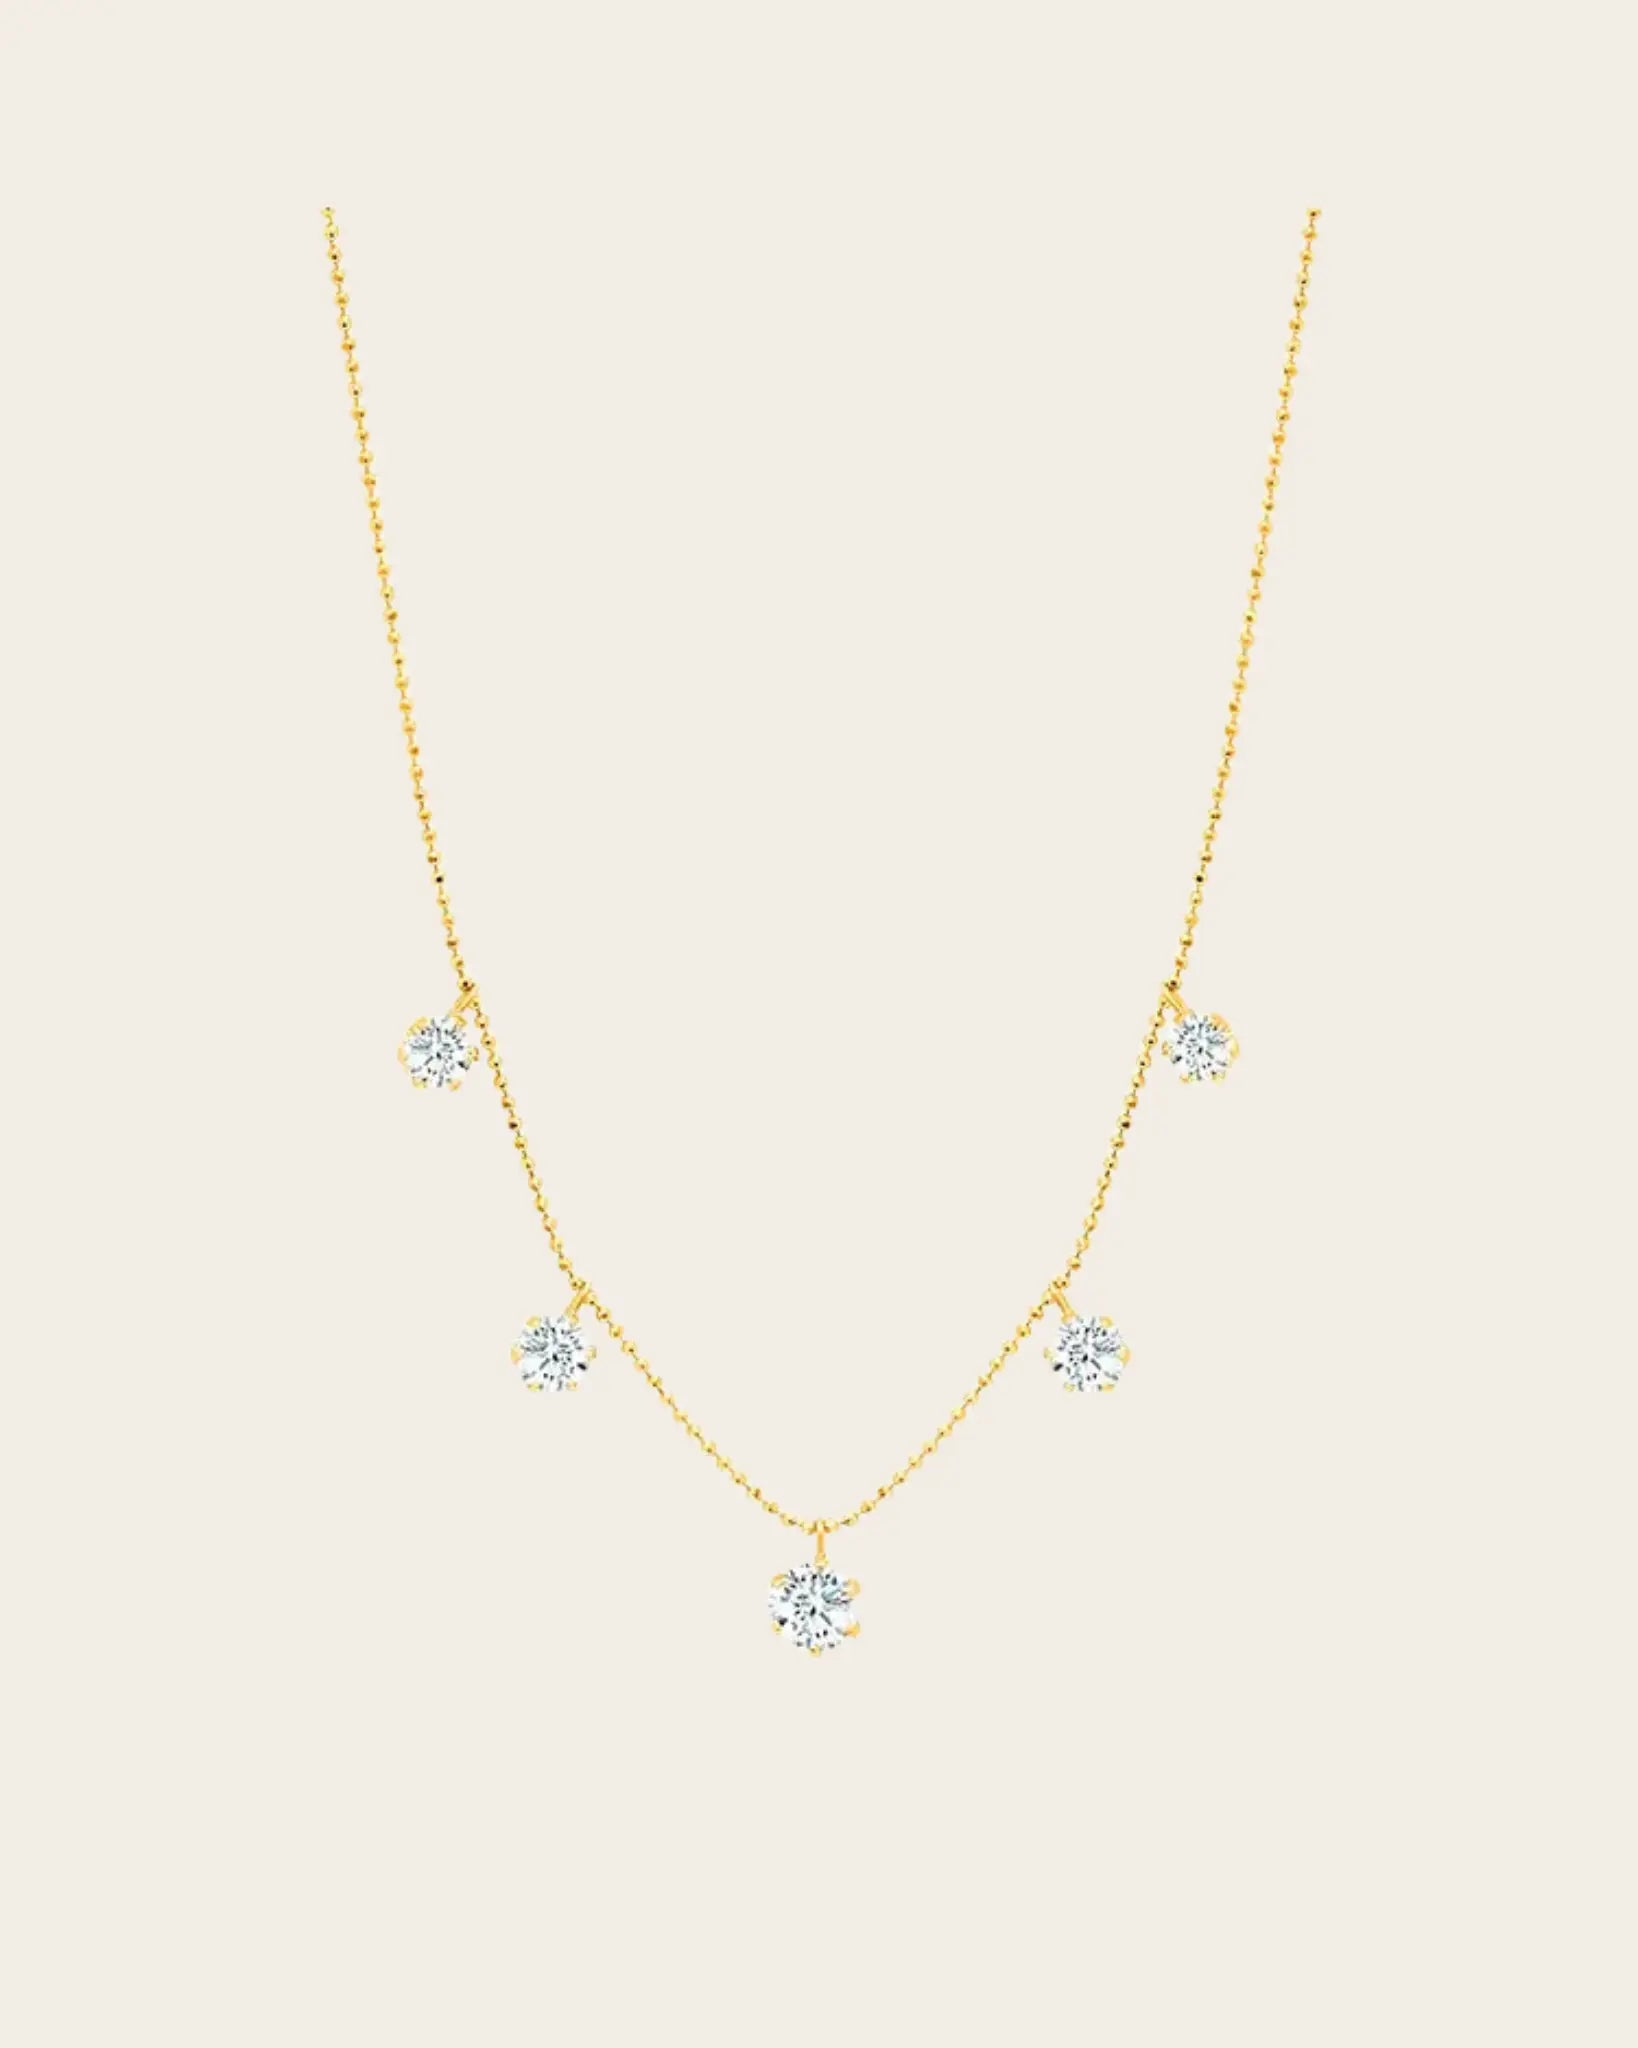 Large Floating Diamond Necklace in Yellow Gold Large Floating Diamond Necklace in Yellow Gold Graziela Gems Graziela Gems  Squash Blossom Vail